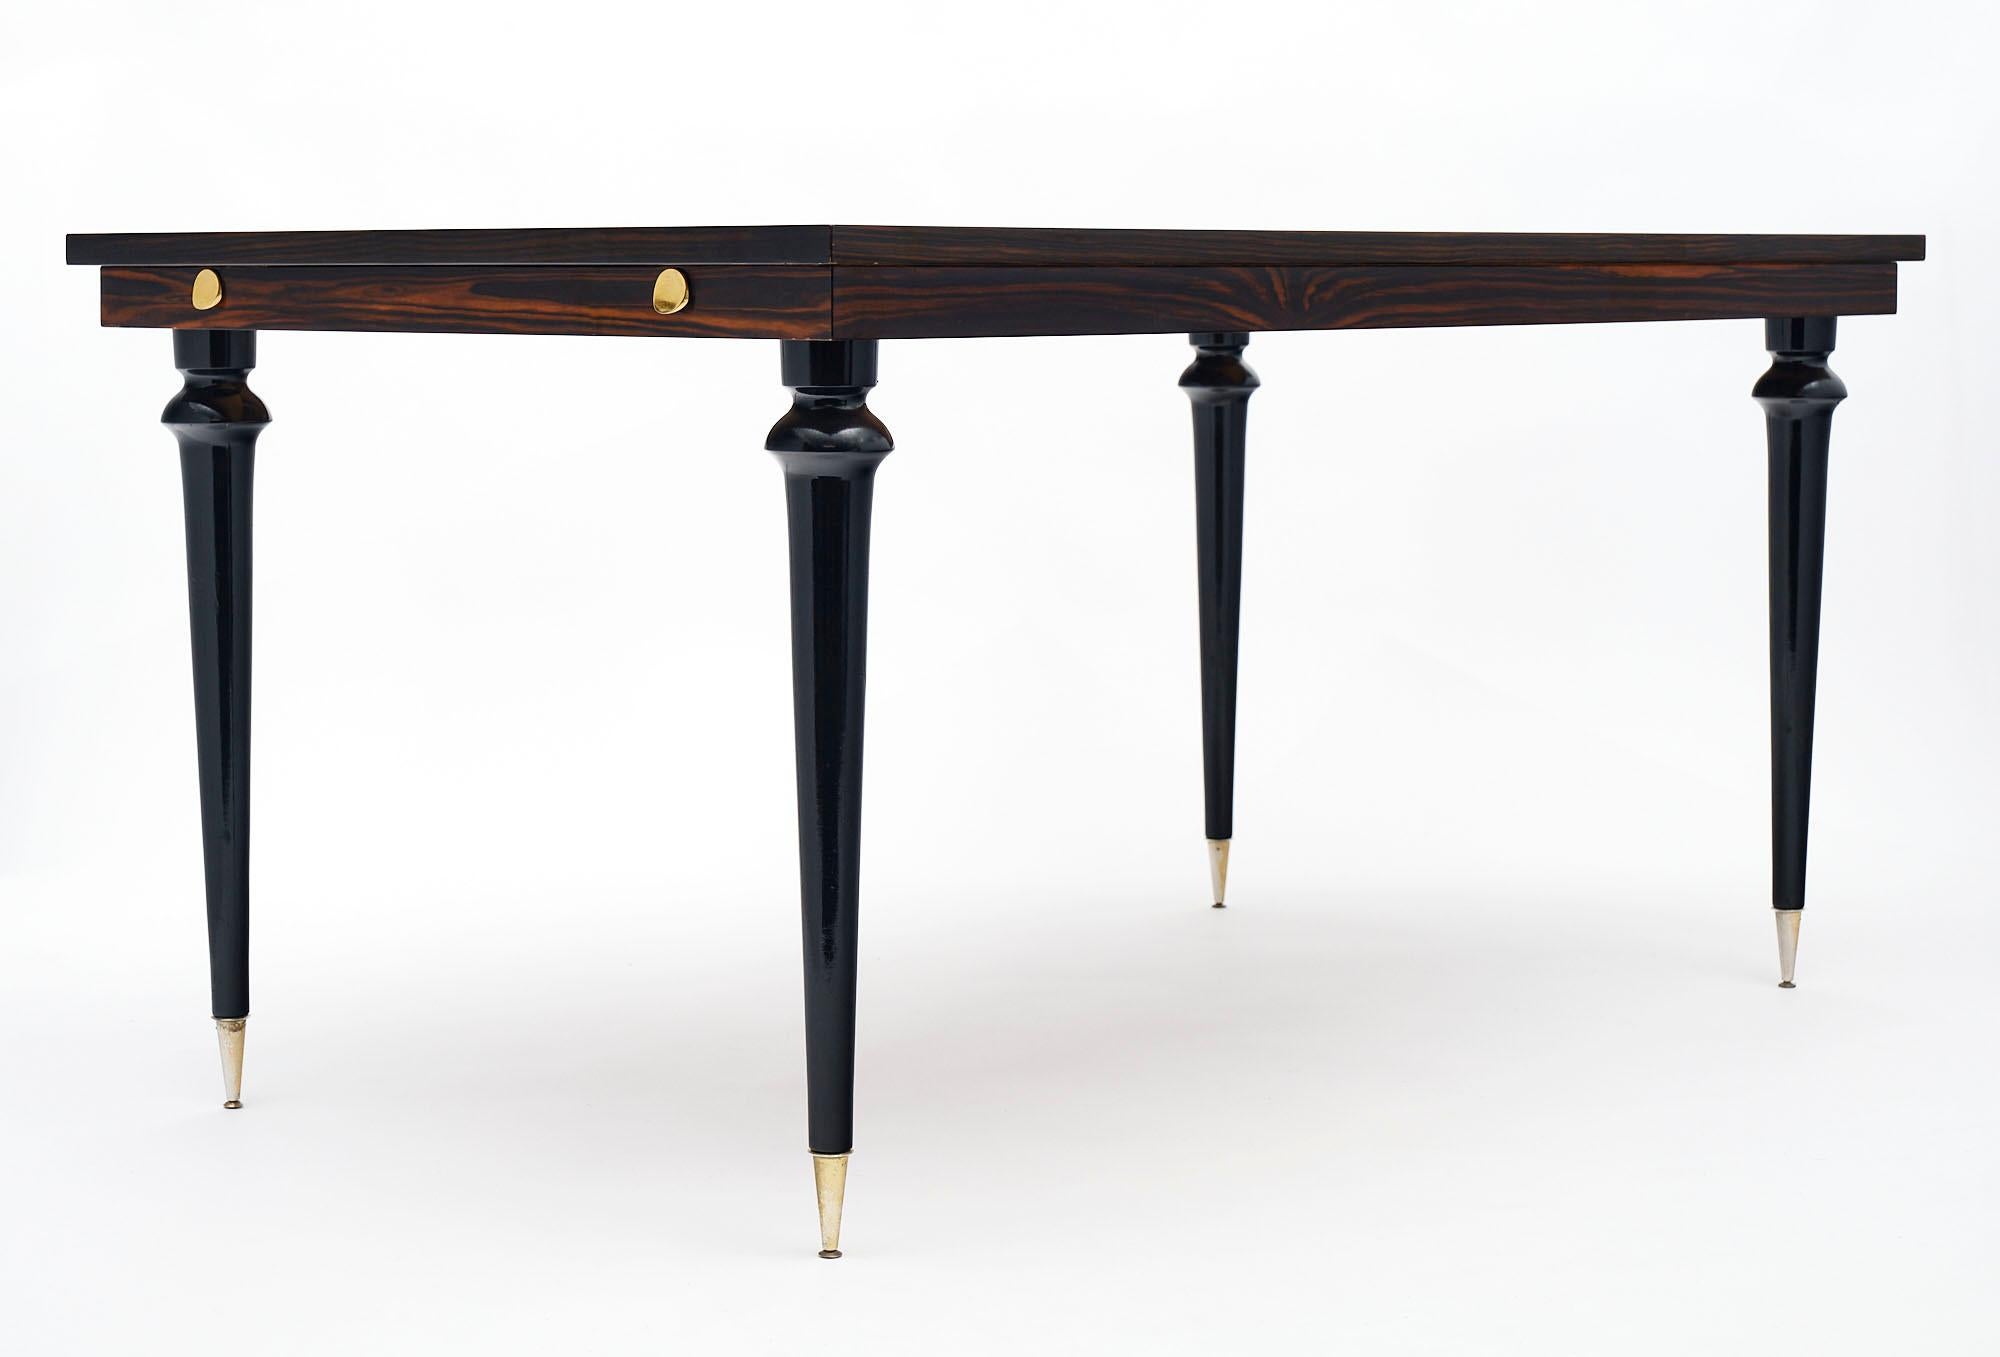 Dining table from France made with a distinct Macassar of Ebony wood veneer and striking parquetry including lemon wood inlay. The legs are tapered and capped with brass feet. Each side has pulls that enable leaves to be added for additional